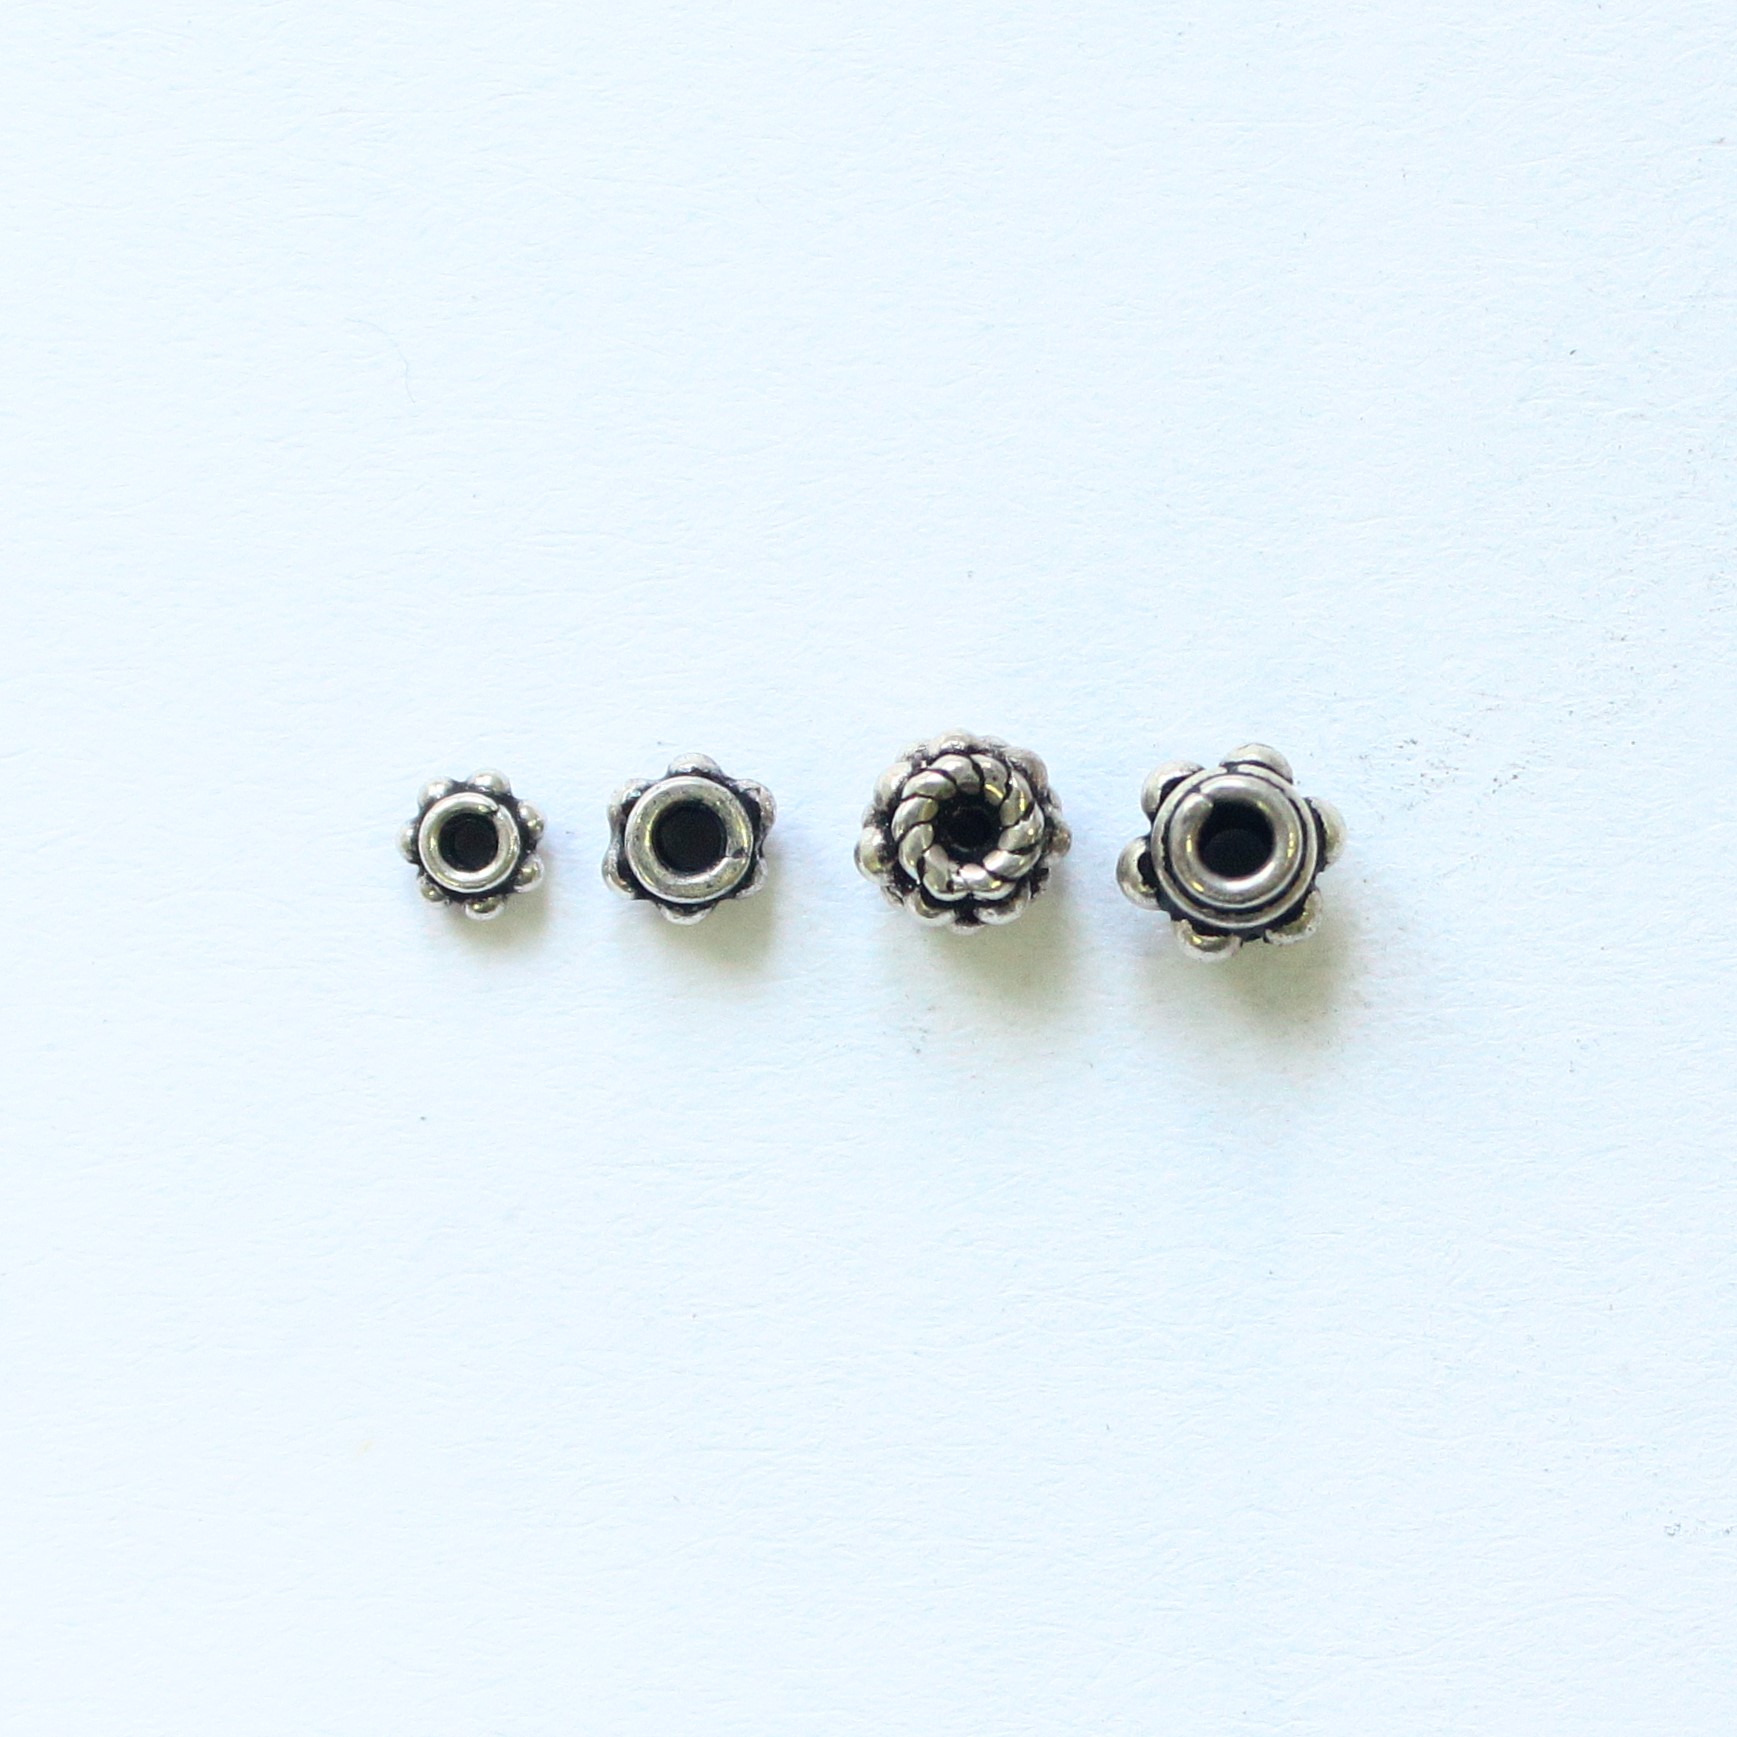 Silver Bali Bead Spacers Jewelry Supplies Findings